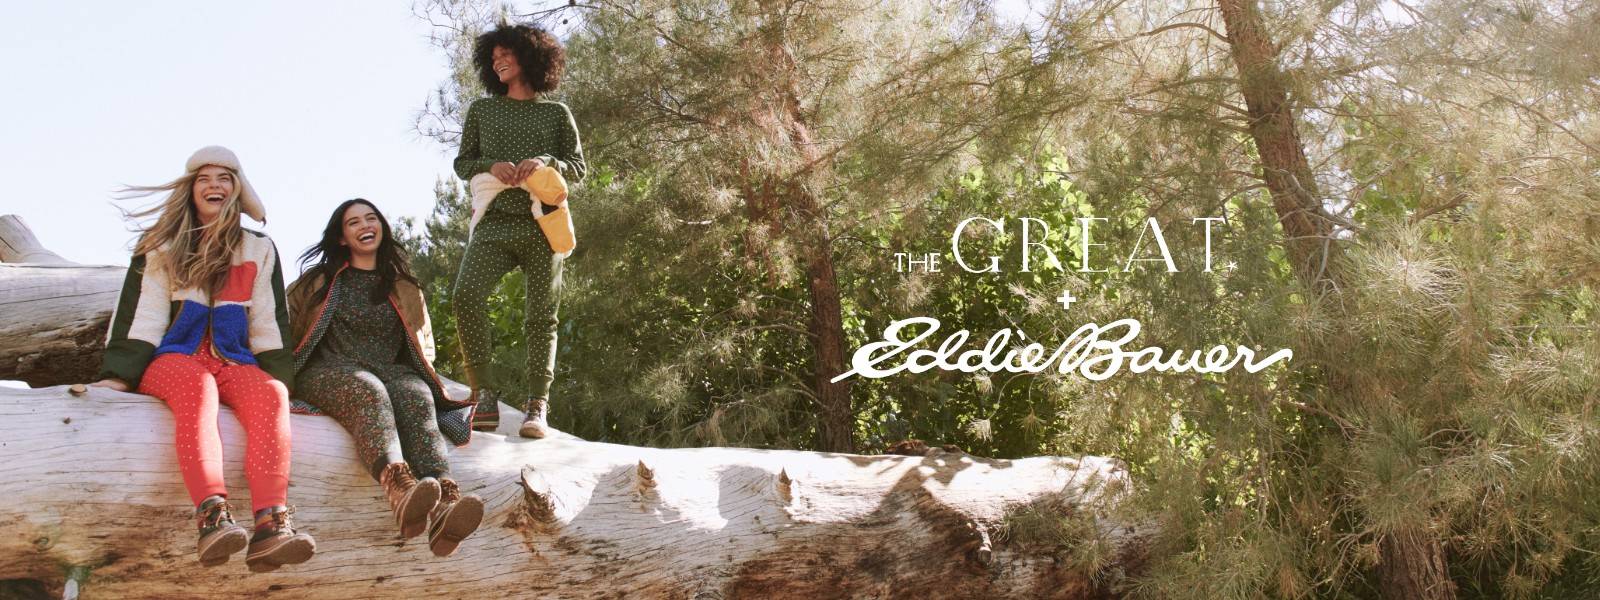 THE GREAT. + EDDIE BAUER. – The Great.